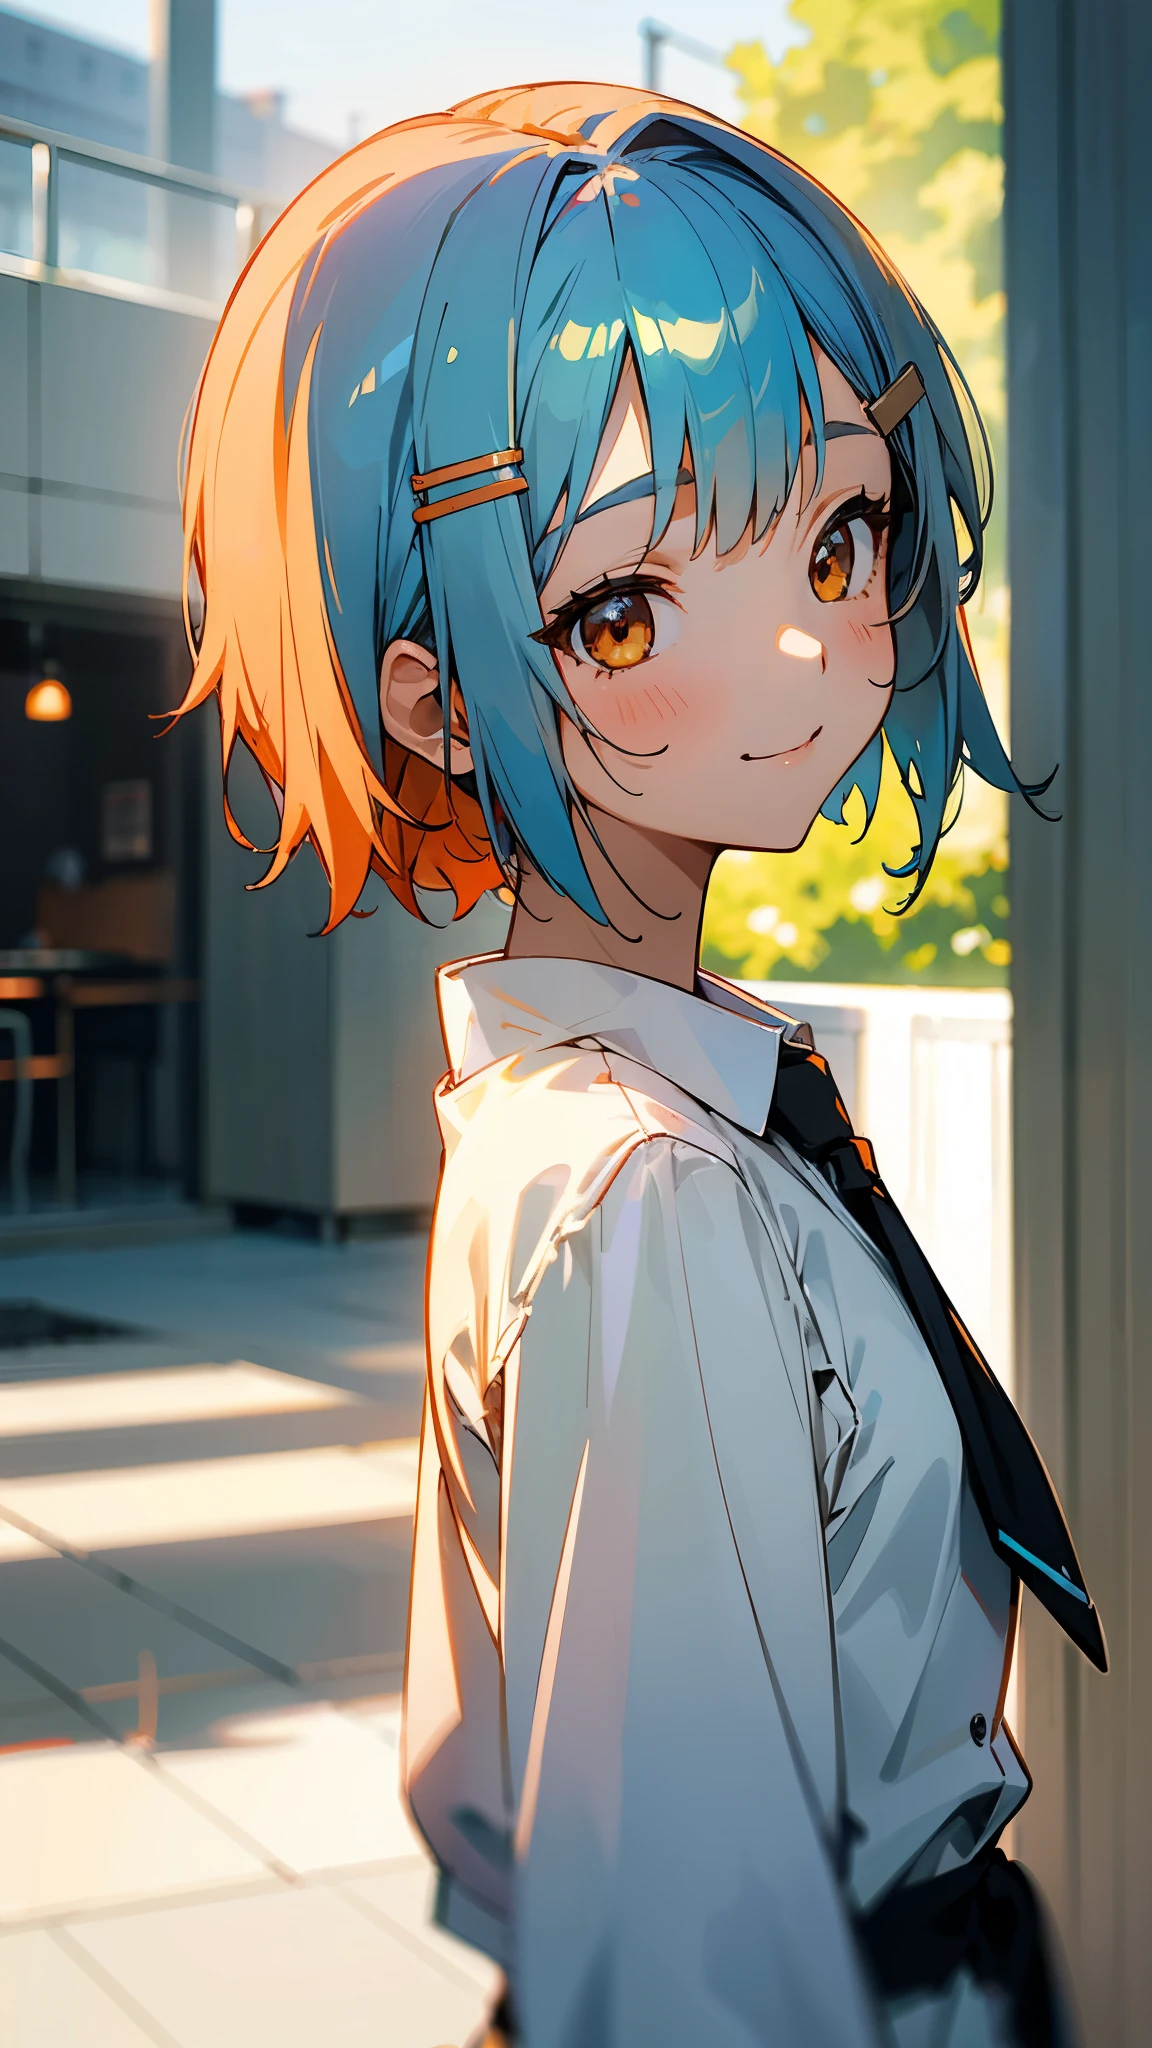 1 girl、Anime Images、Shiny light blue hair、Short Bob Hairstyles、Tie your hair with an orange hair clip、Beautiful brown eyes、smile、From the side、Sharp contourorning Cafe Terrace、Background blur、Written boundary depth